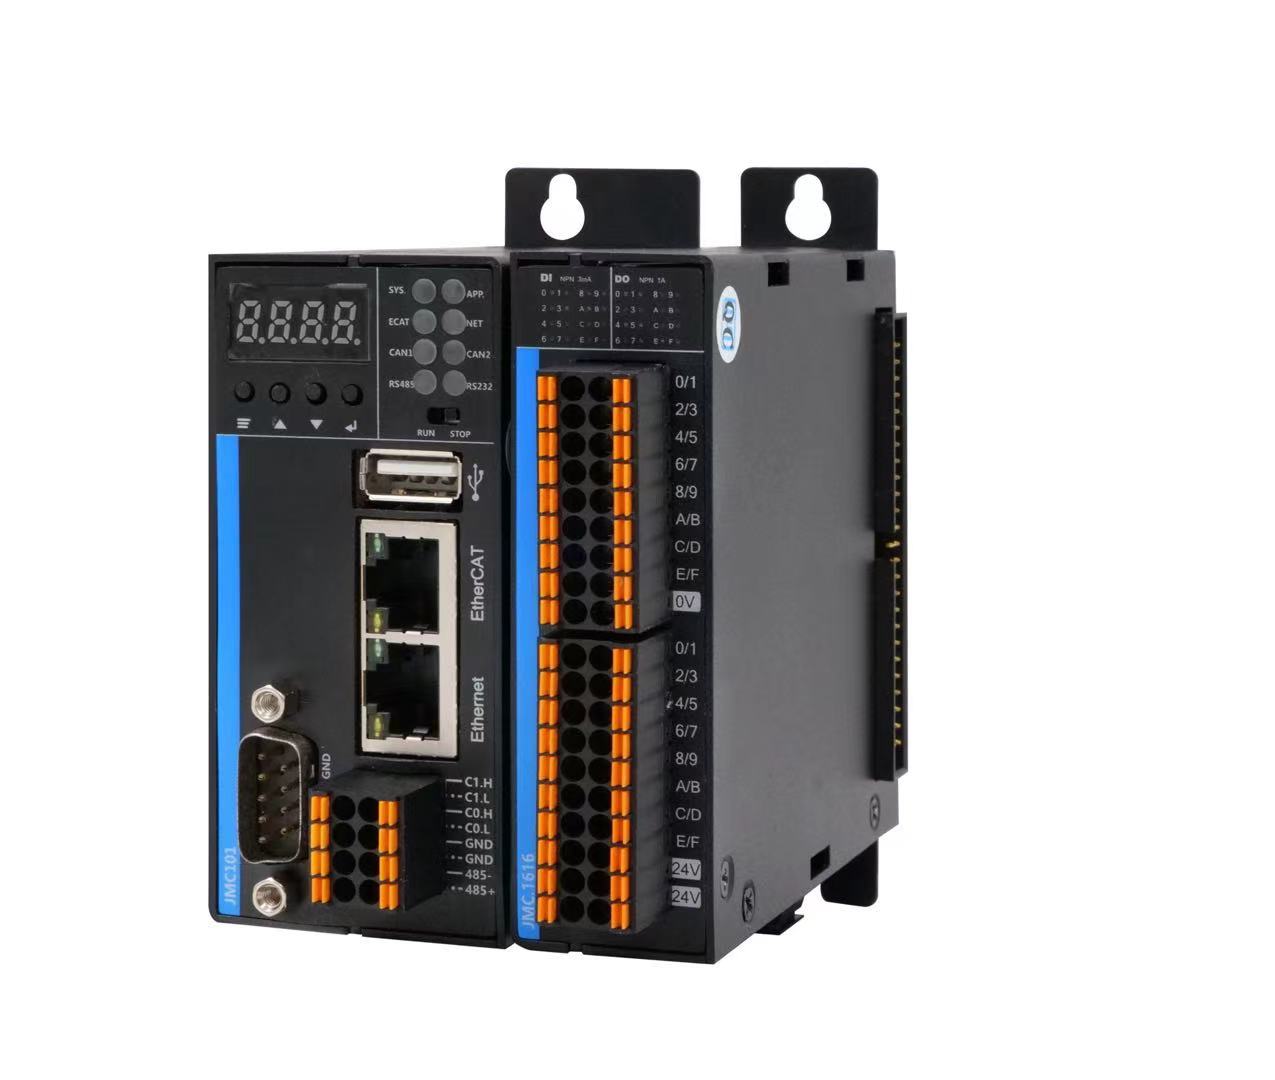 New product launch--Domestic high-end multi-axis bus type motion controller JMC-101 launched